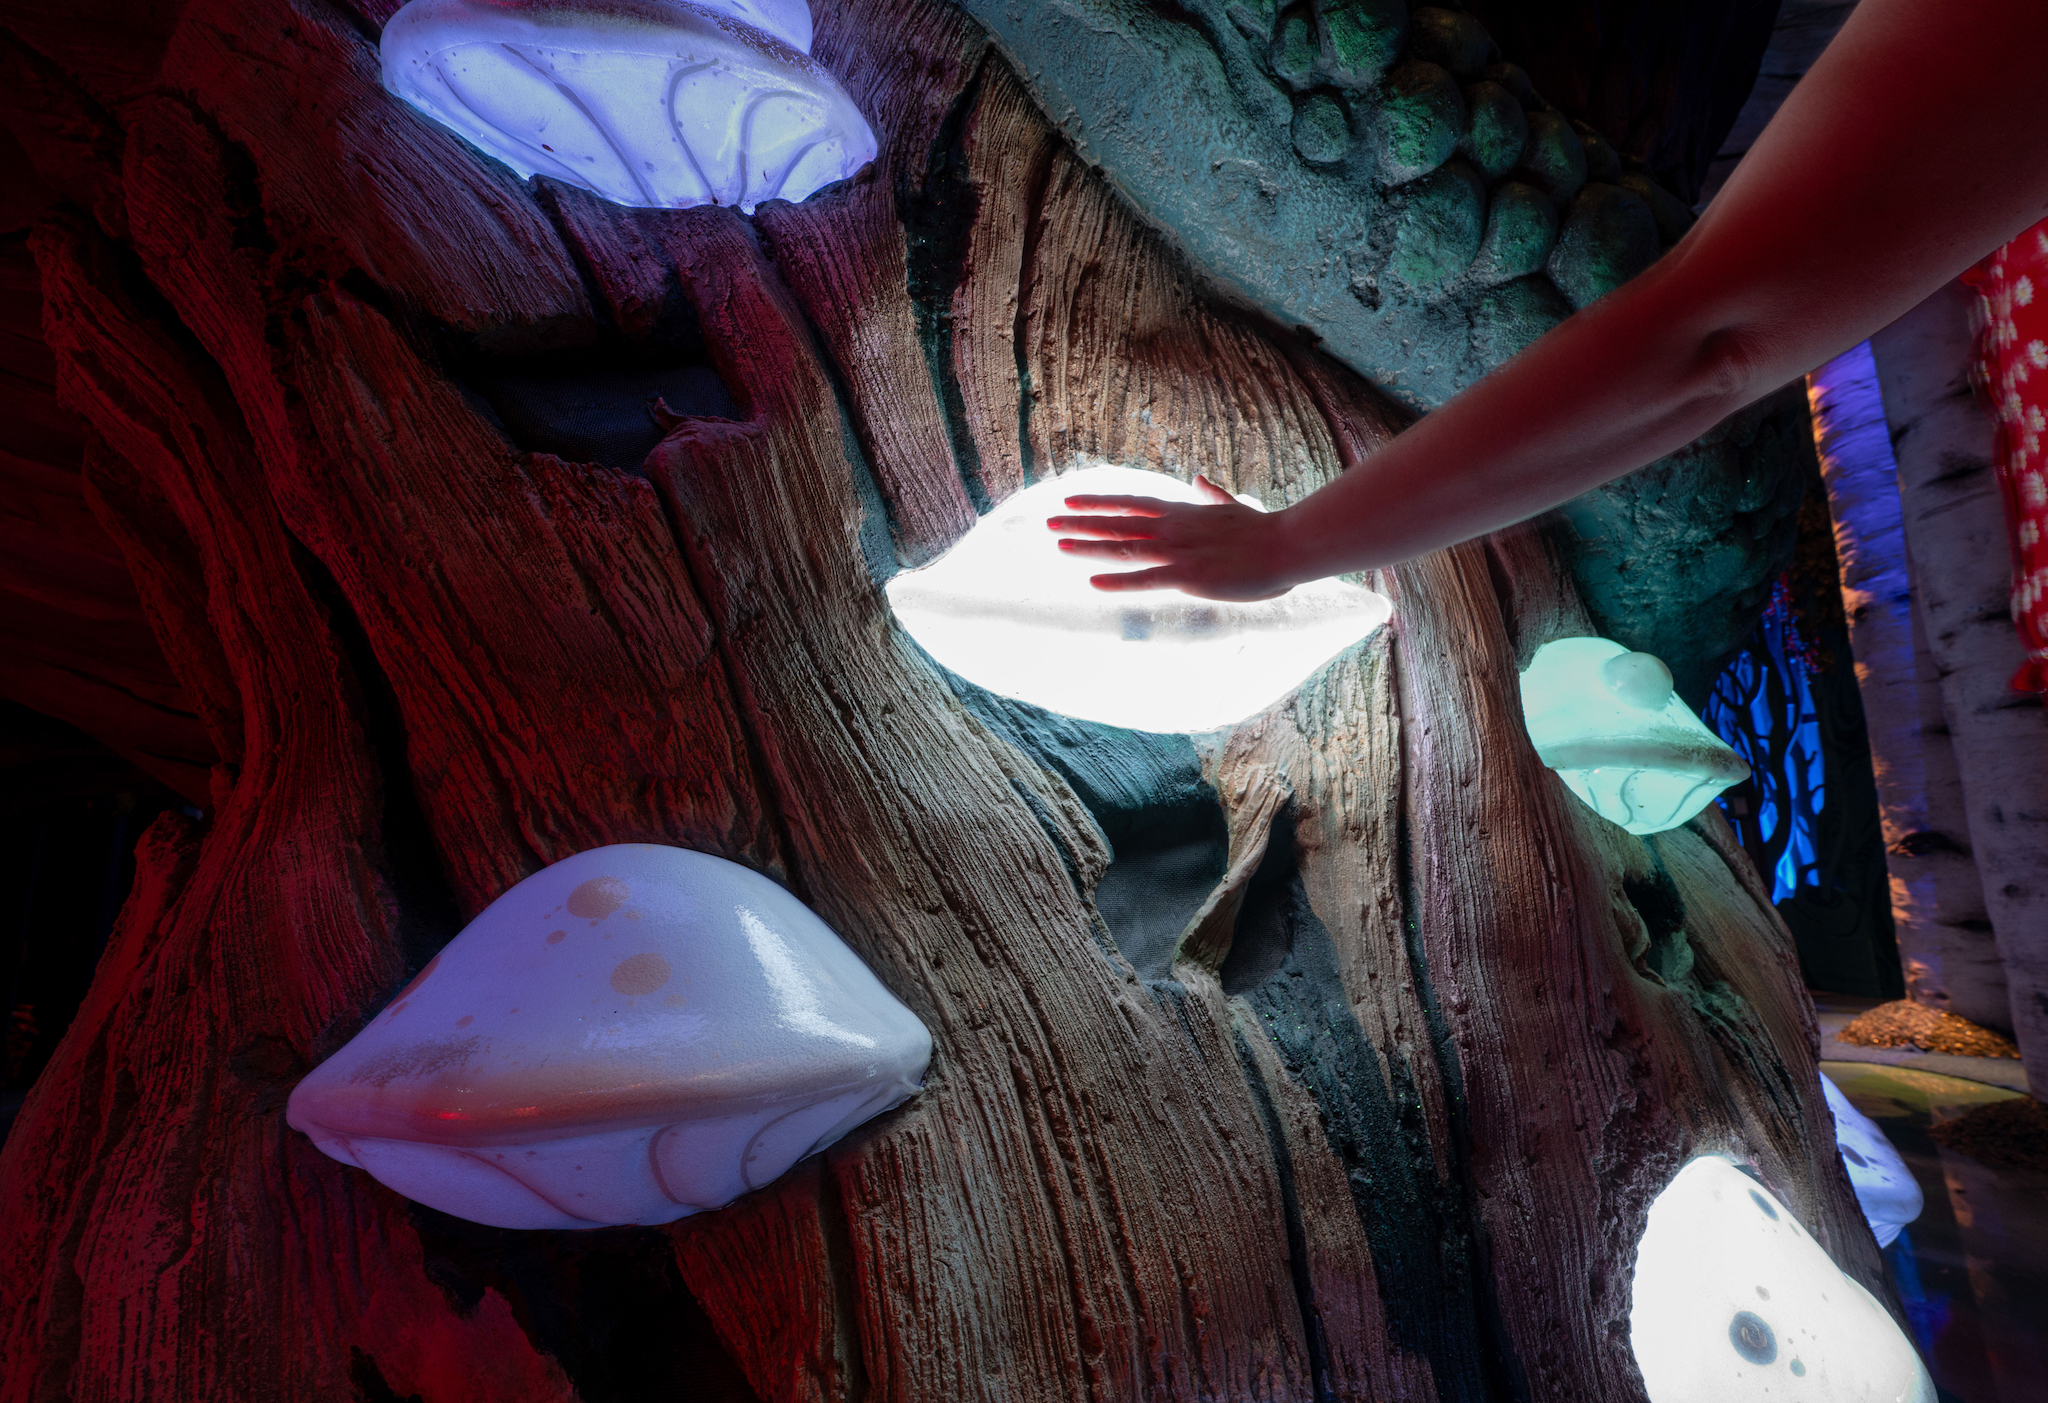 A hand reaches from off frame to touch a large mushroom-shaped object on a faux tree trunk, causing it to light up.